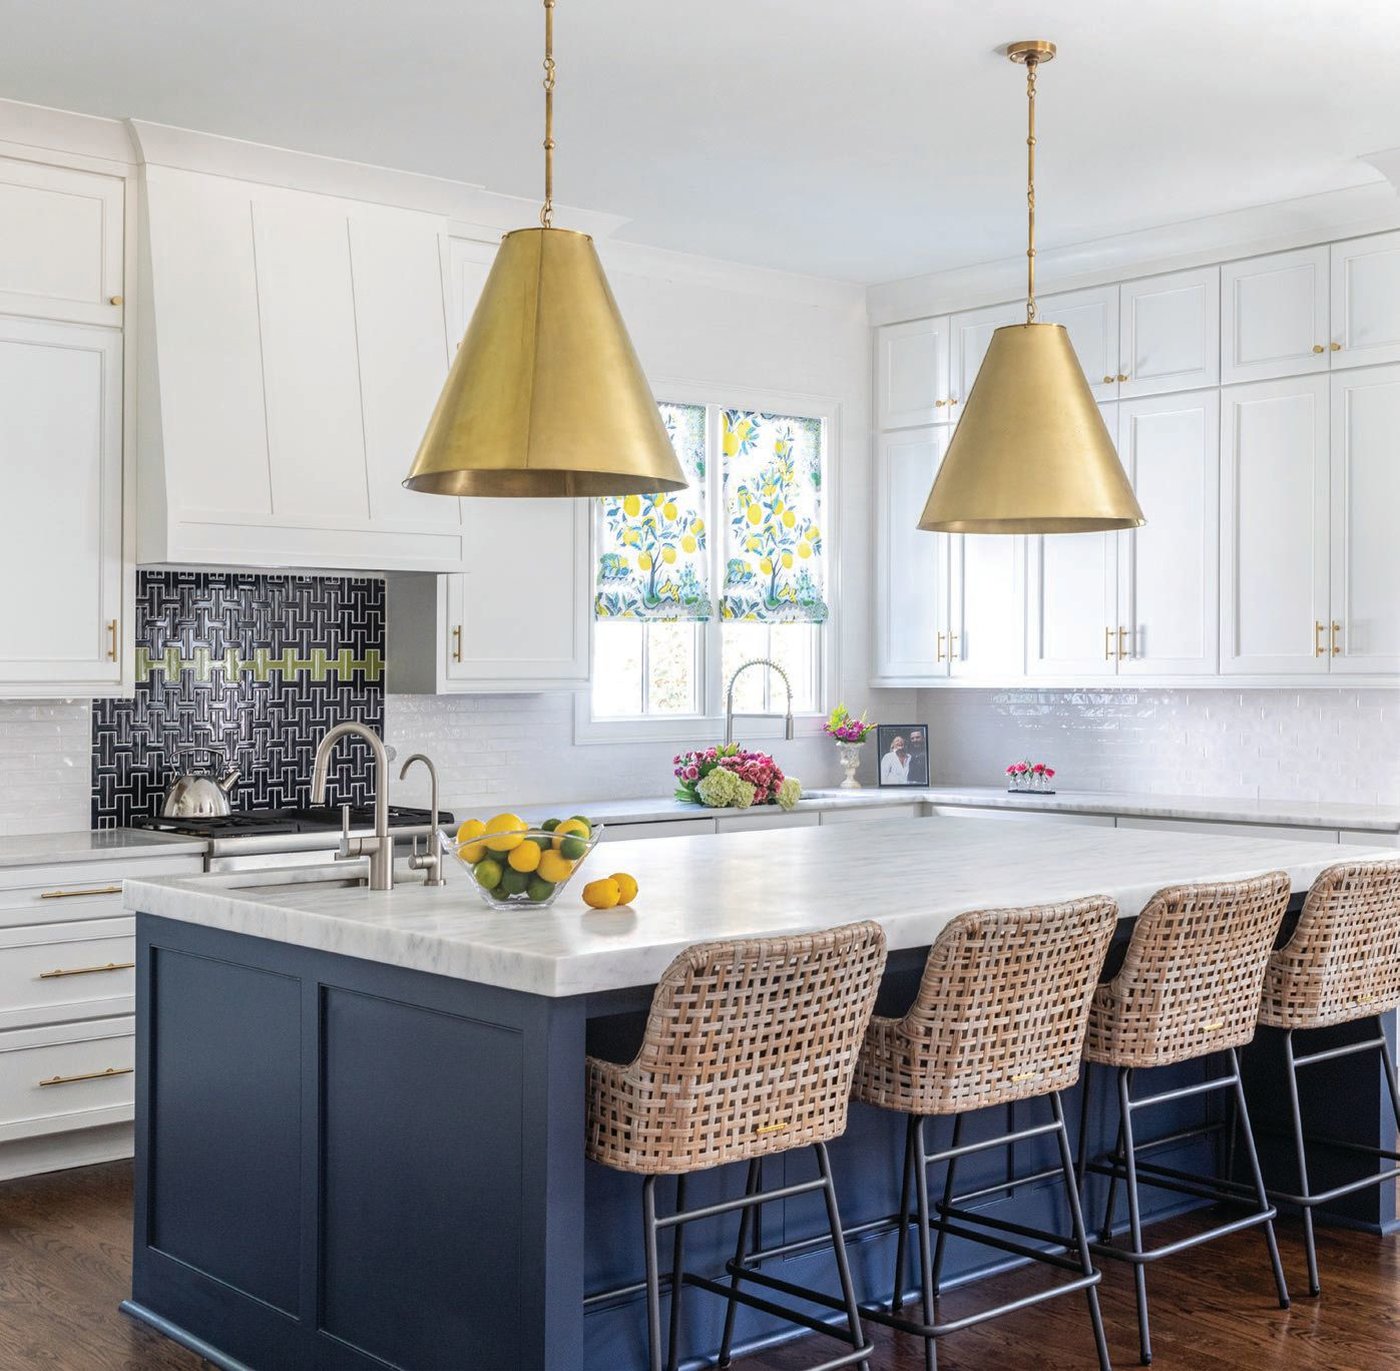 A kitchen island in Sherwin-Williams’ Naval paint with rattan-style chairs from Ballard Designs and oversized golden pendant lights by Circa Lighting. Photographed by Heidi Harris Photography